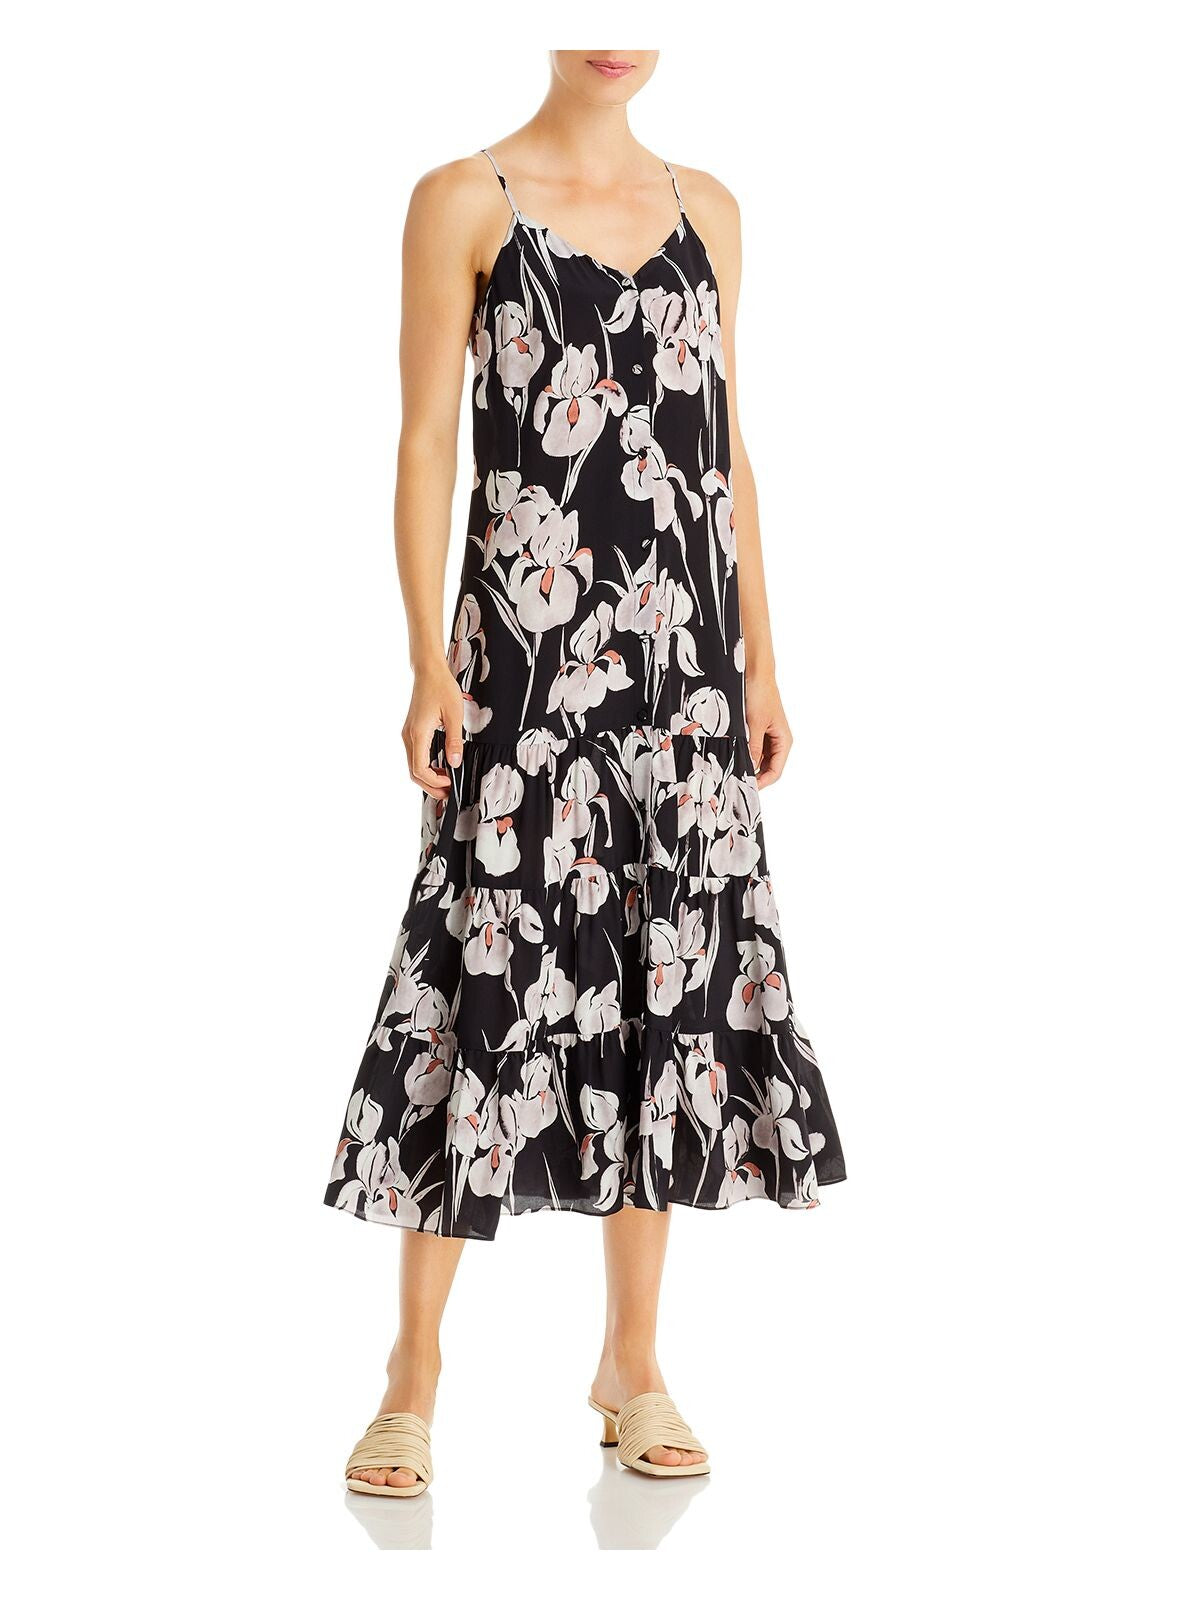 JASON WU Womens Black Adjustable Button Up Unlined Tiered Floral Spaghetti Strap V Neck Midi Fit + Flare Dress 2